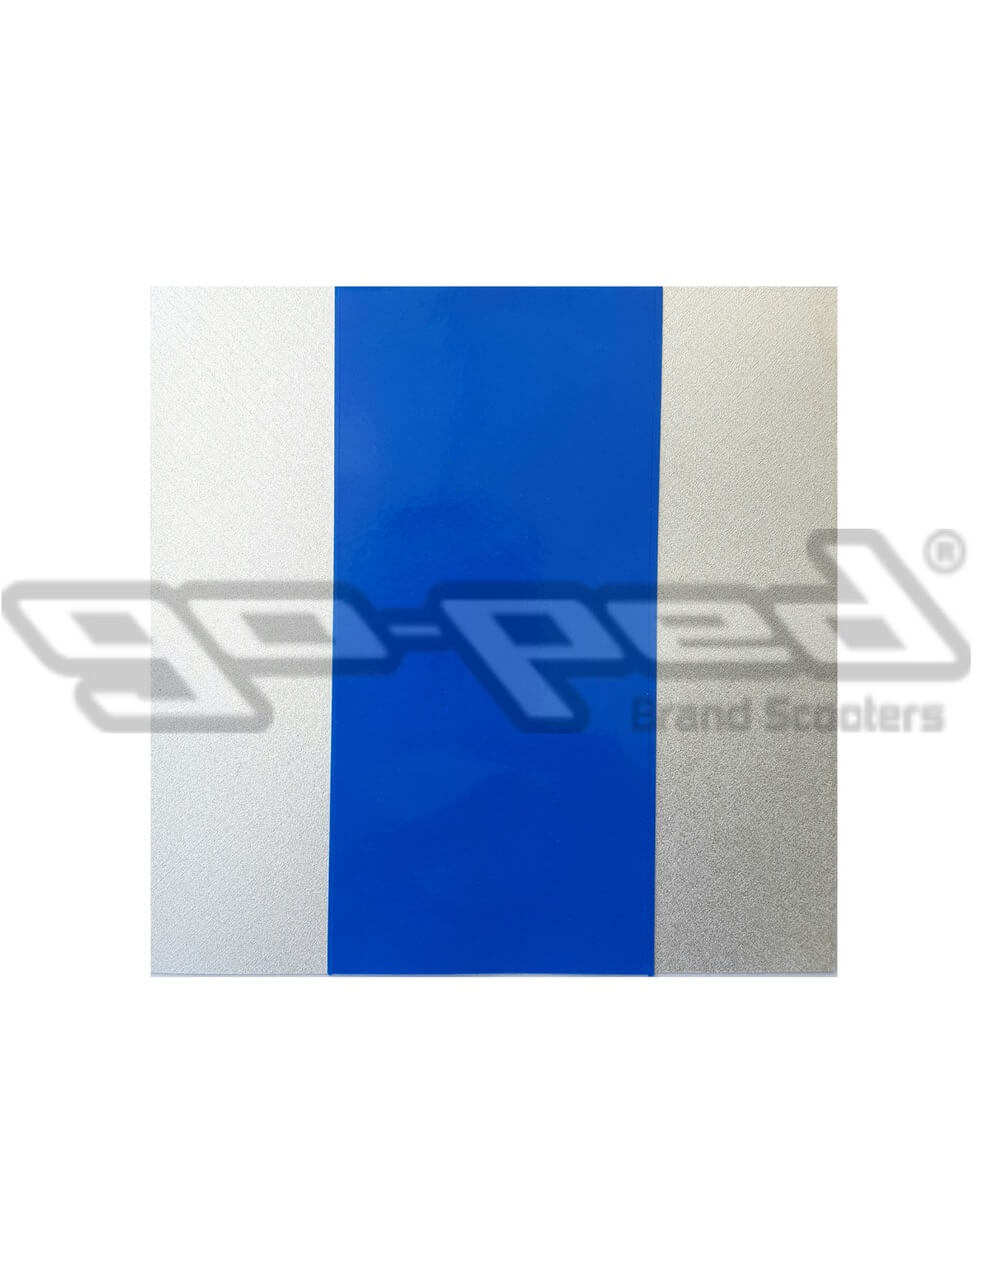 Go-Ped Replacement REFLECTIVE T-BAR PAD WITH ADHESIVE (1061) for New Style Scooters